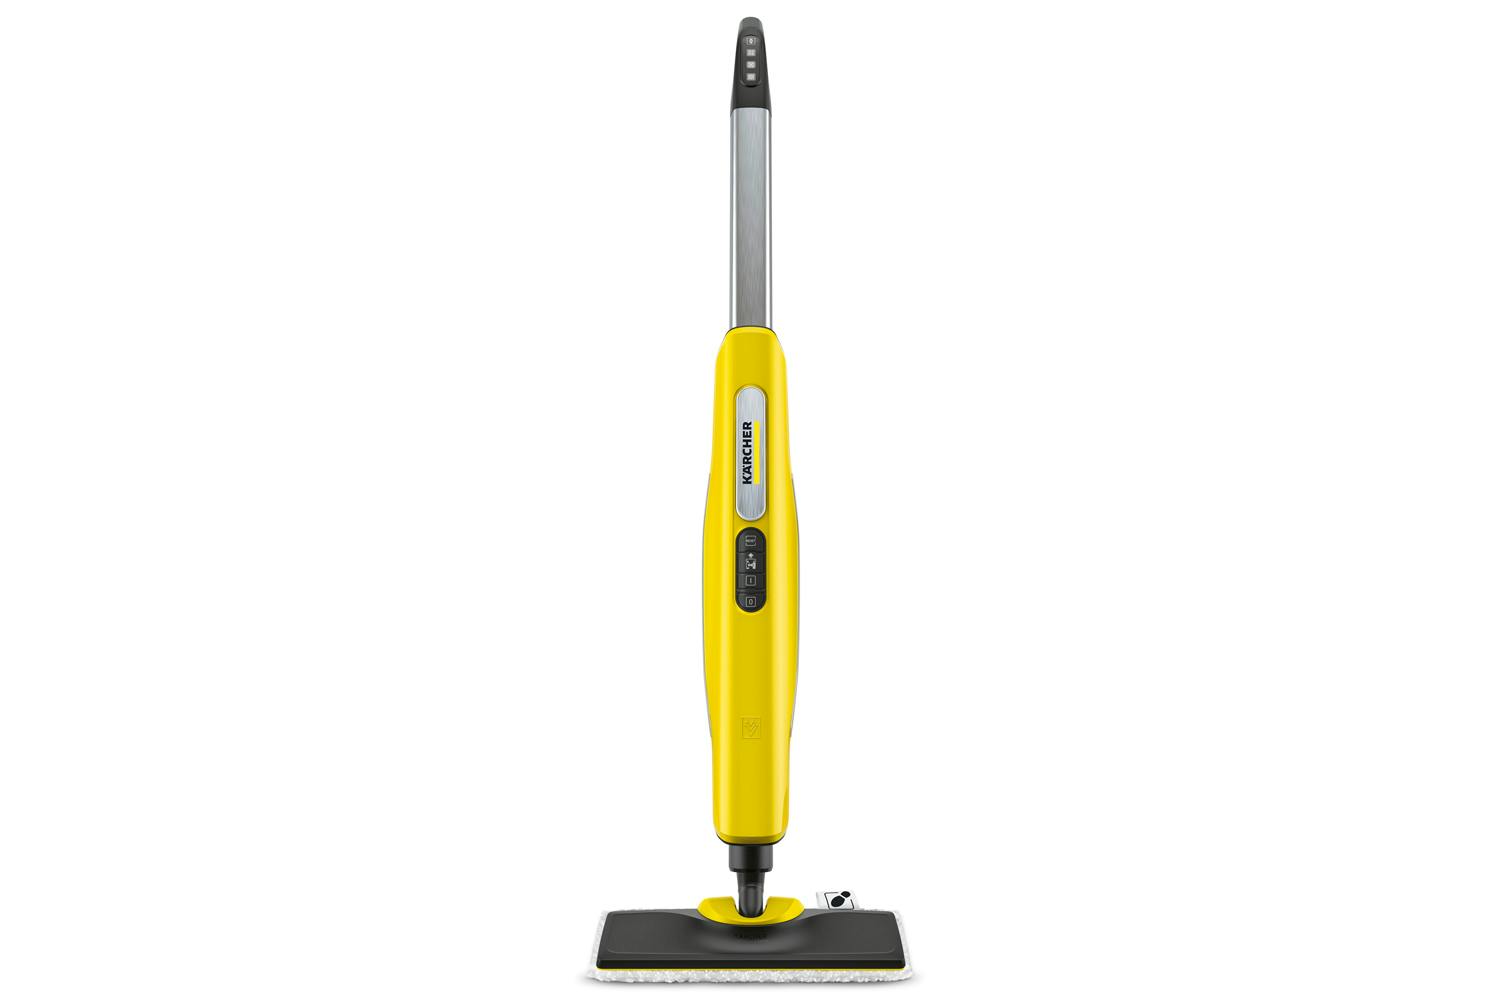 KÄRCHER STEAM CLEANER SC 3 EasyFix I am absolutely in love with my